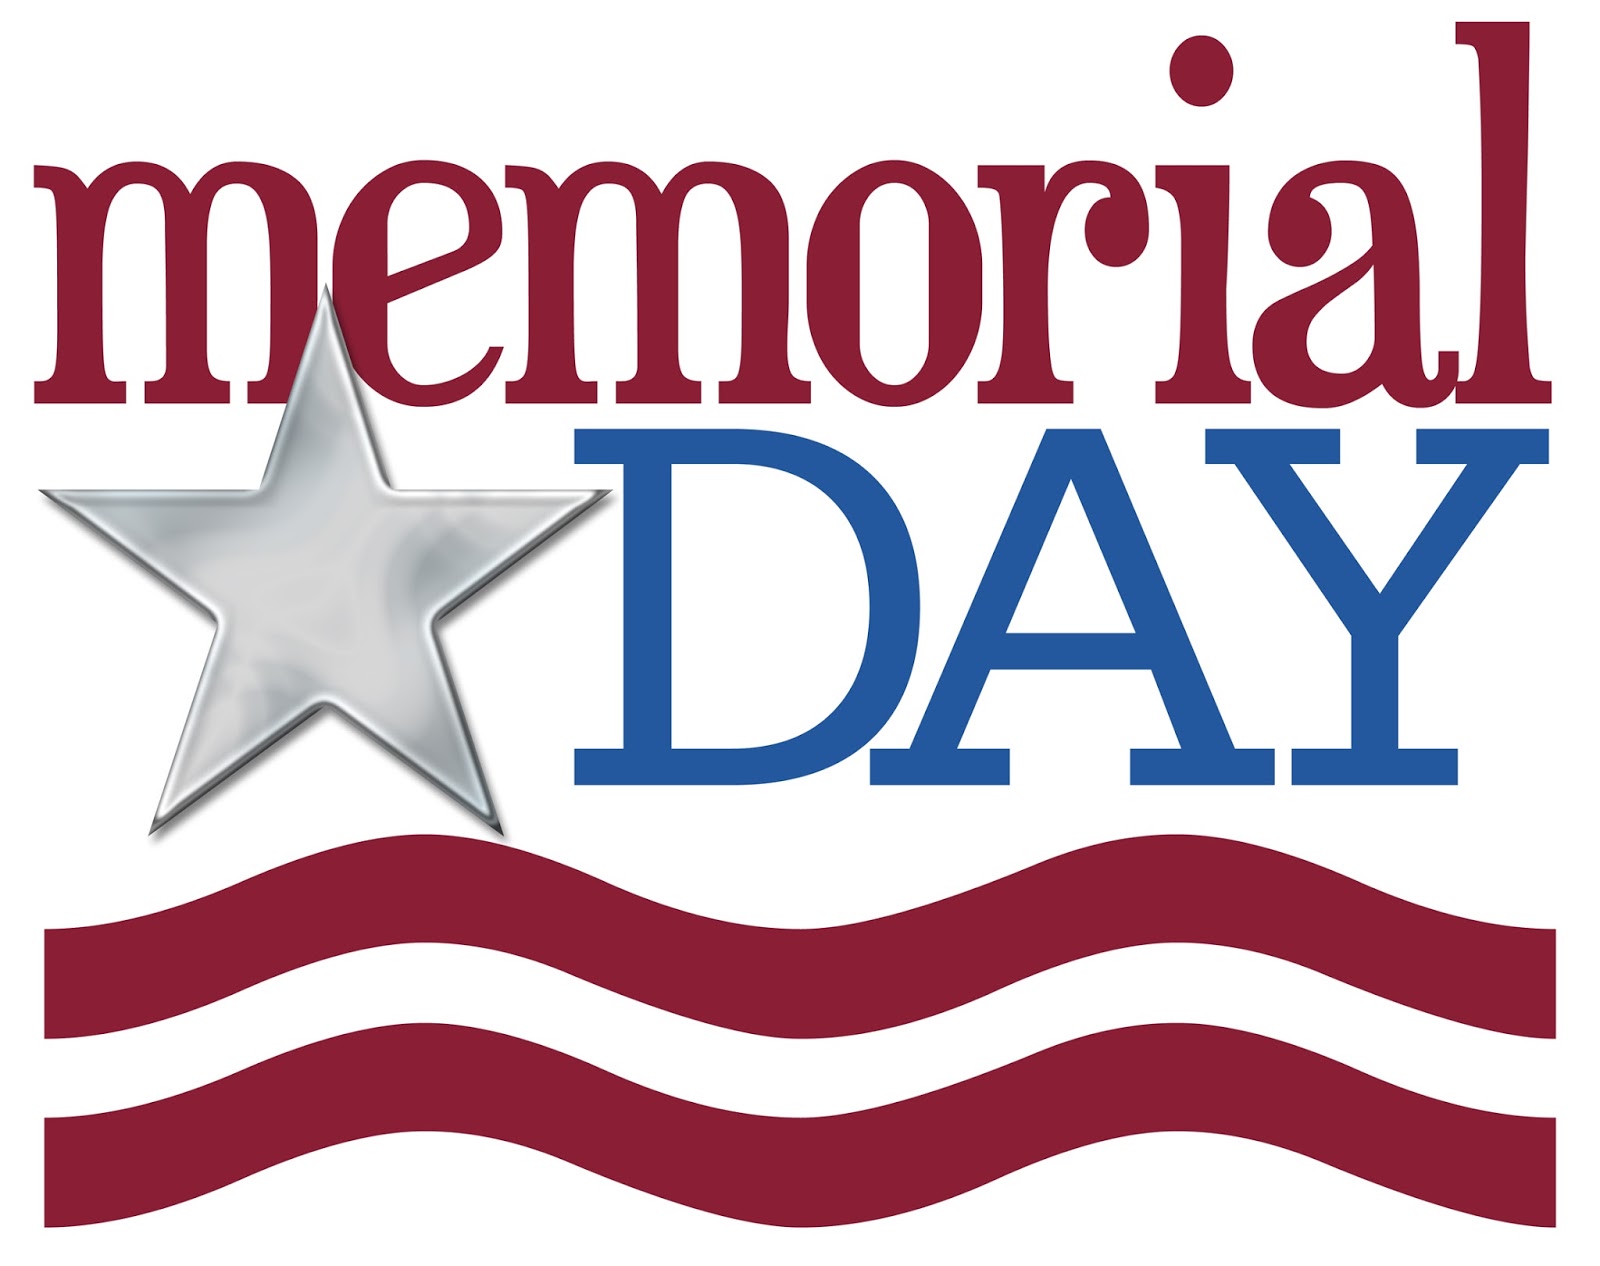 990 Memorial Day free clipart.